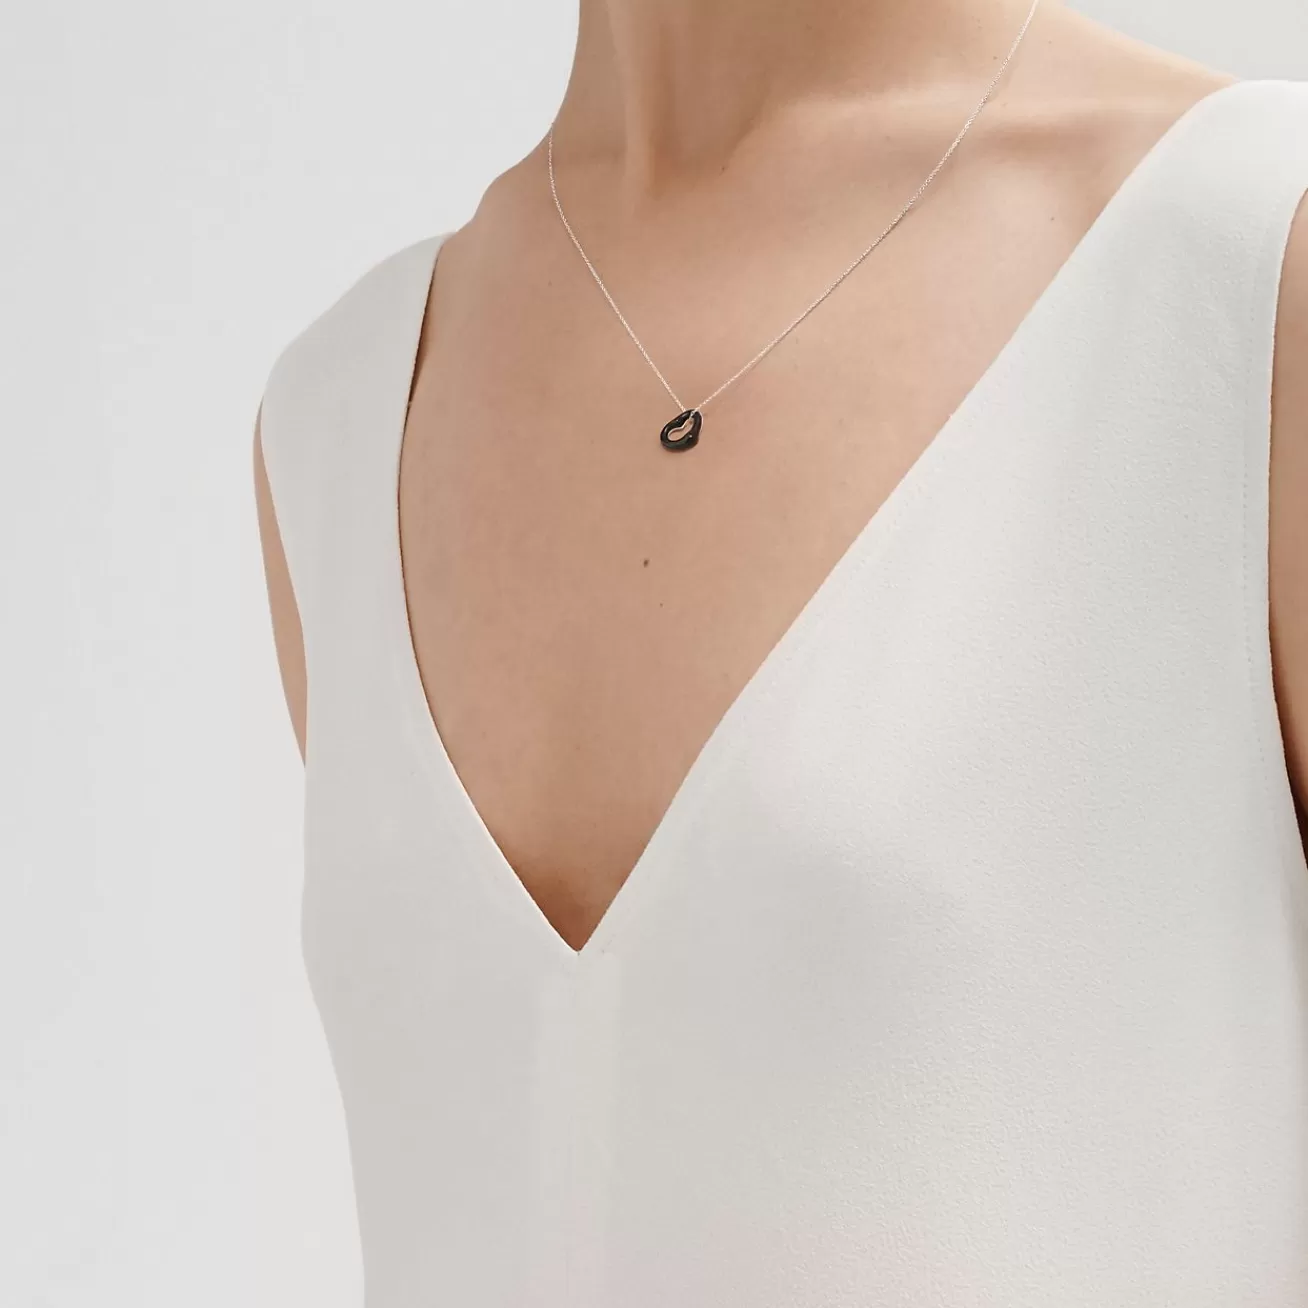 Tiffany & Co. Elsa Peretti® Open Heart pendant of black jade and sterling silver. | ^ Necklaces & Pendants | Sterling Silver Jewelry